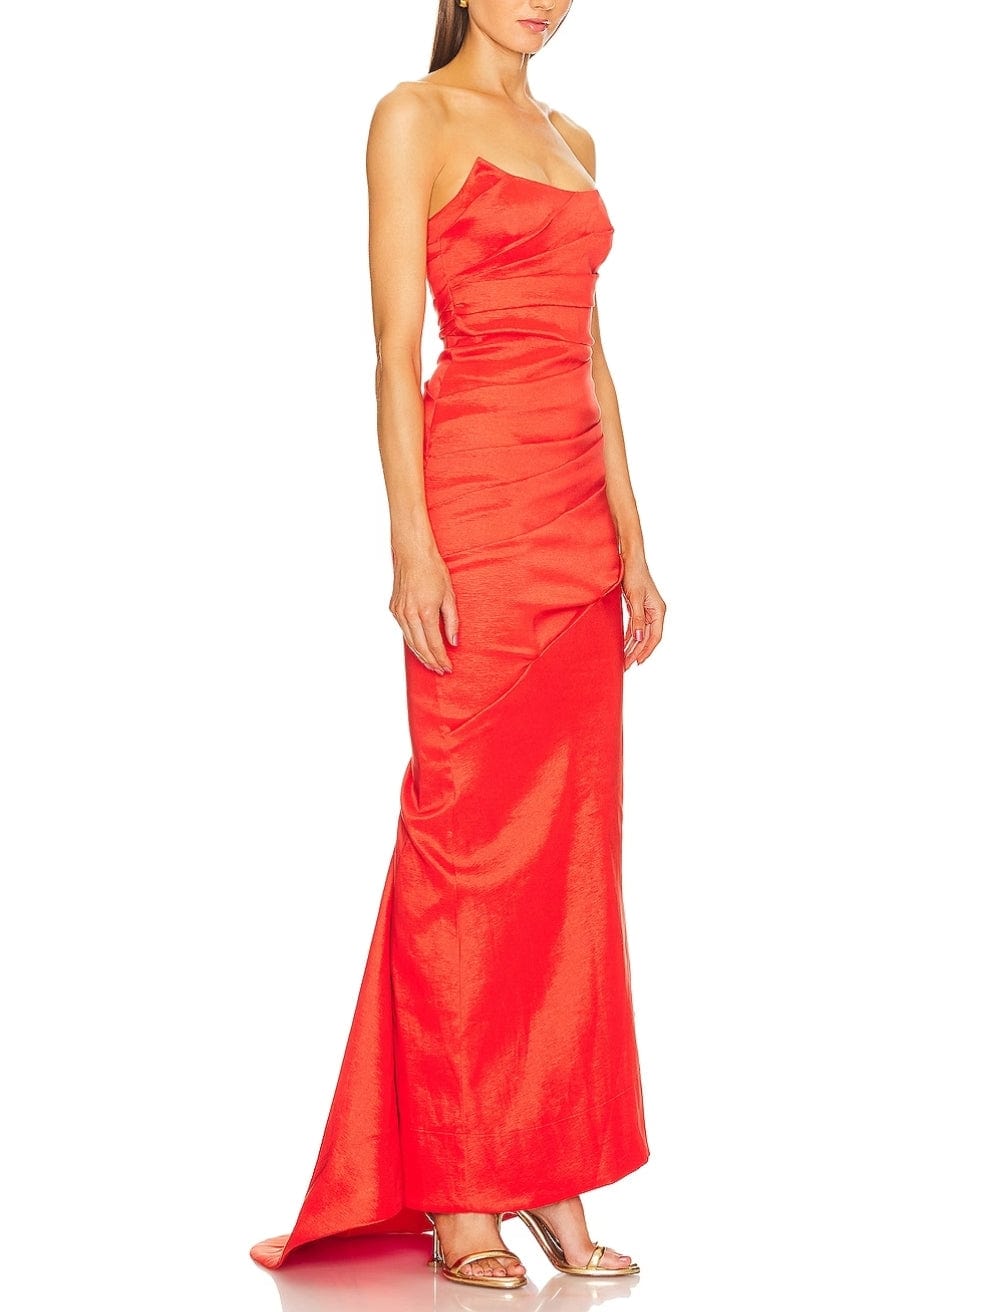 Bette Gown in Red Orange